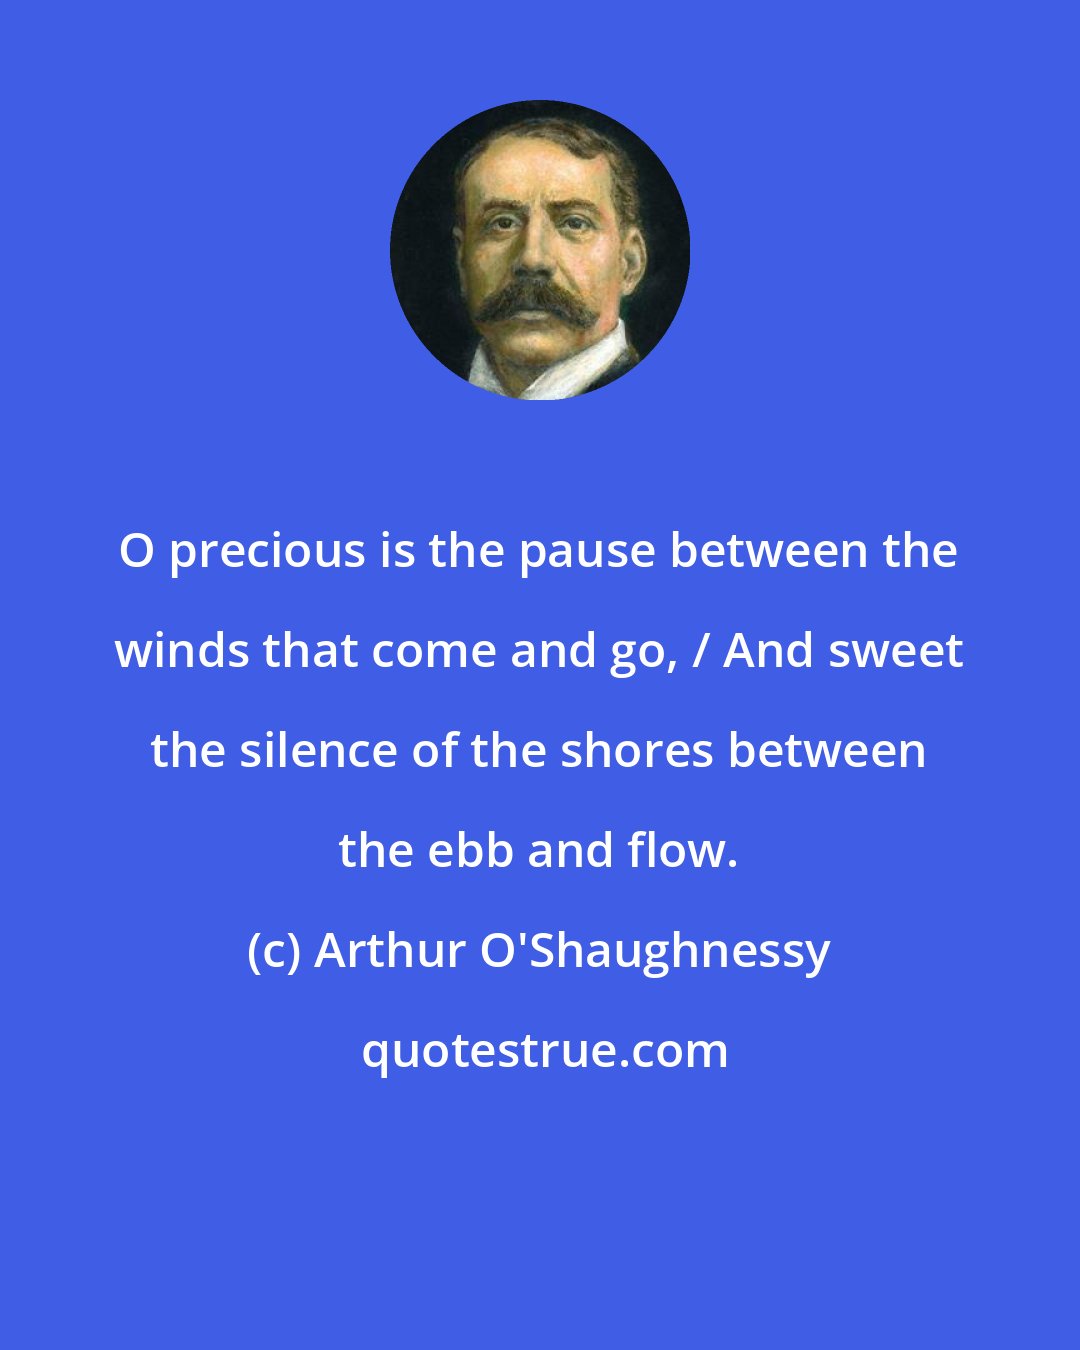 Arthur O'Shaughnessy: O precious is the pause between the winds that come and go, / And sweet the silence of the shores between the ebb and flow.